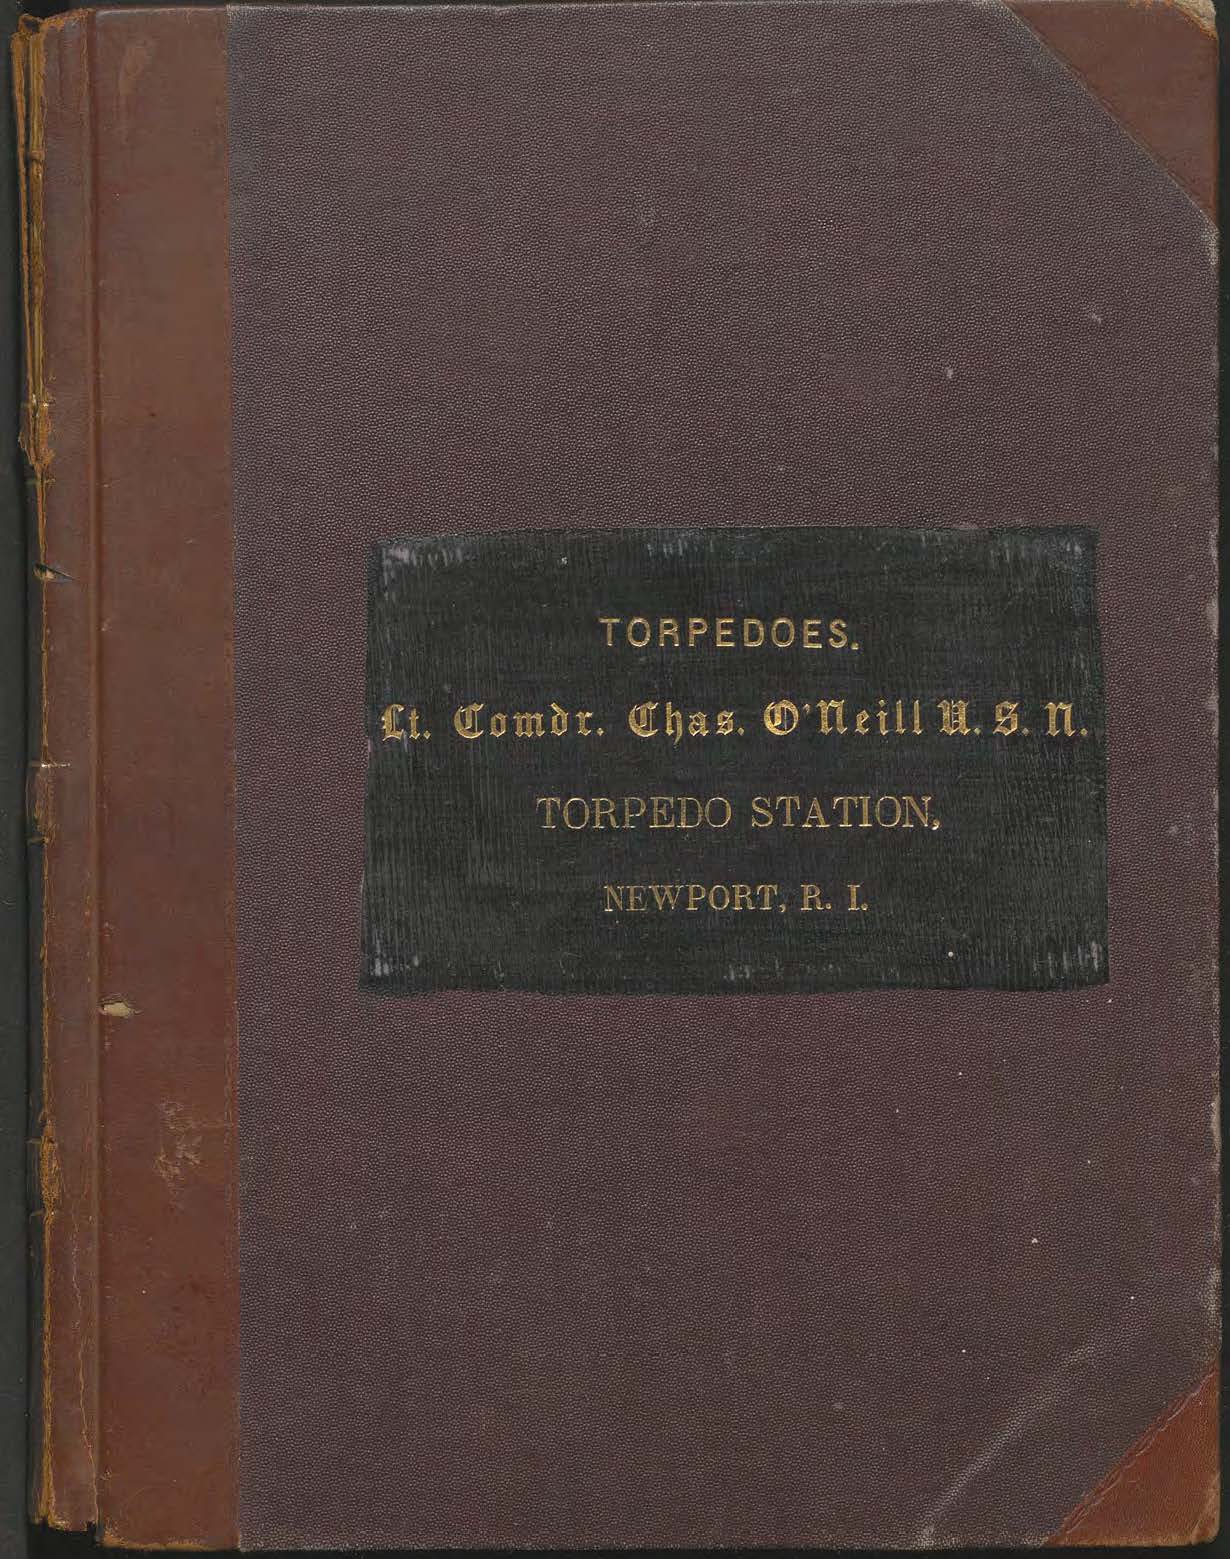 Charles O&#39;Neill notebook on torpedoes